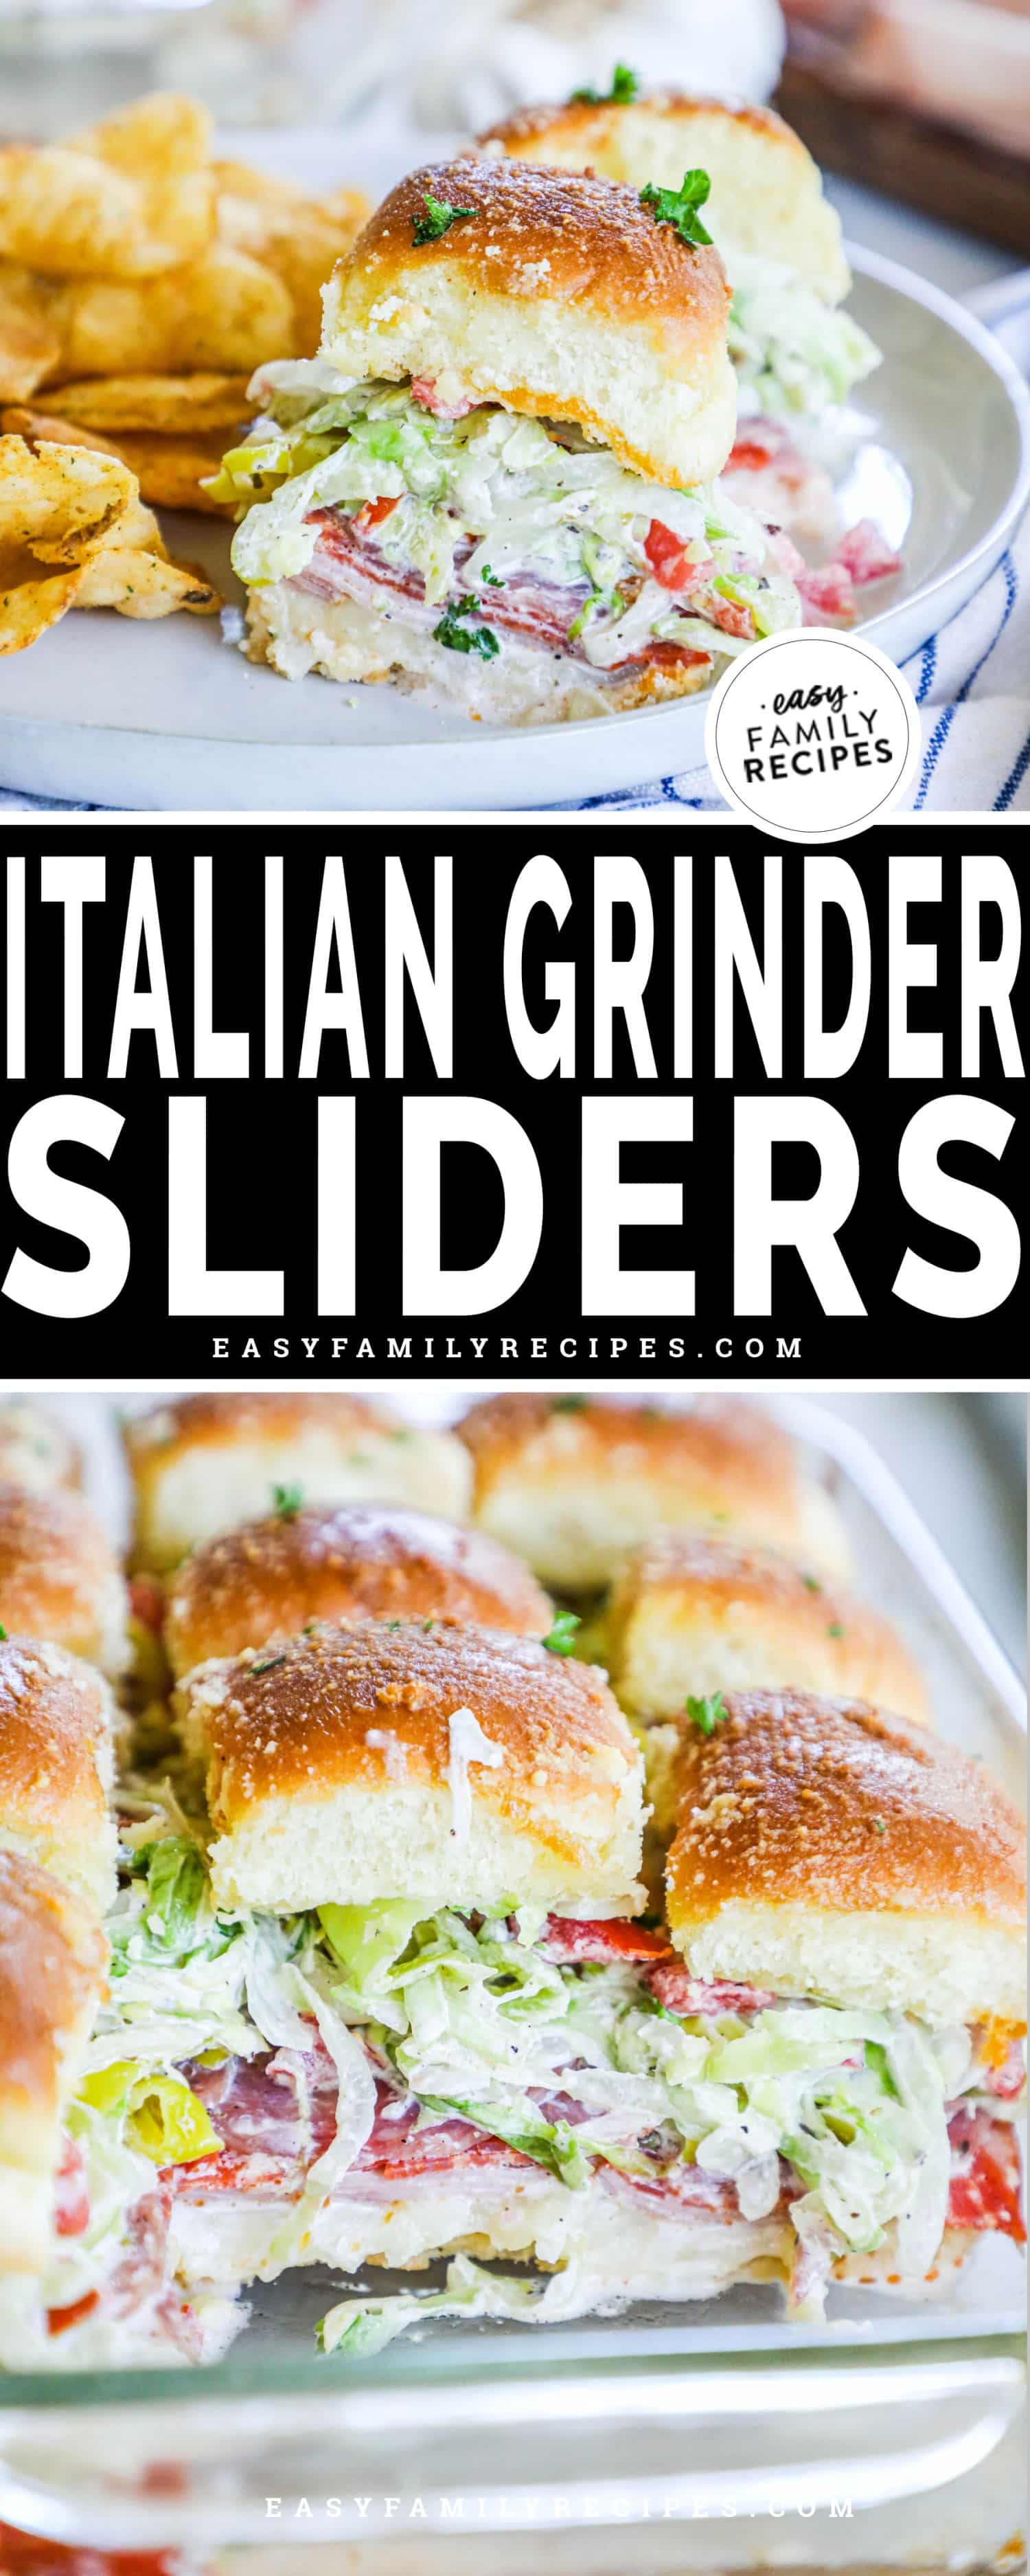 2 image collage with Italian grinder sliders on a plate with potatoes and the bottom image showing them in a baking dish.